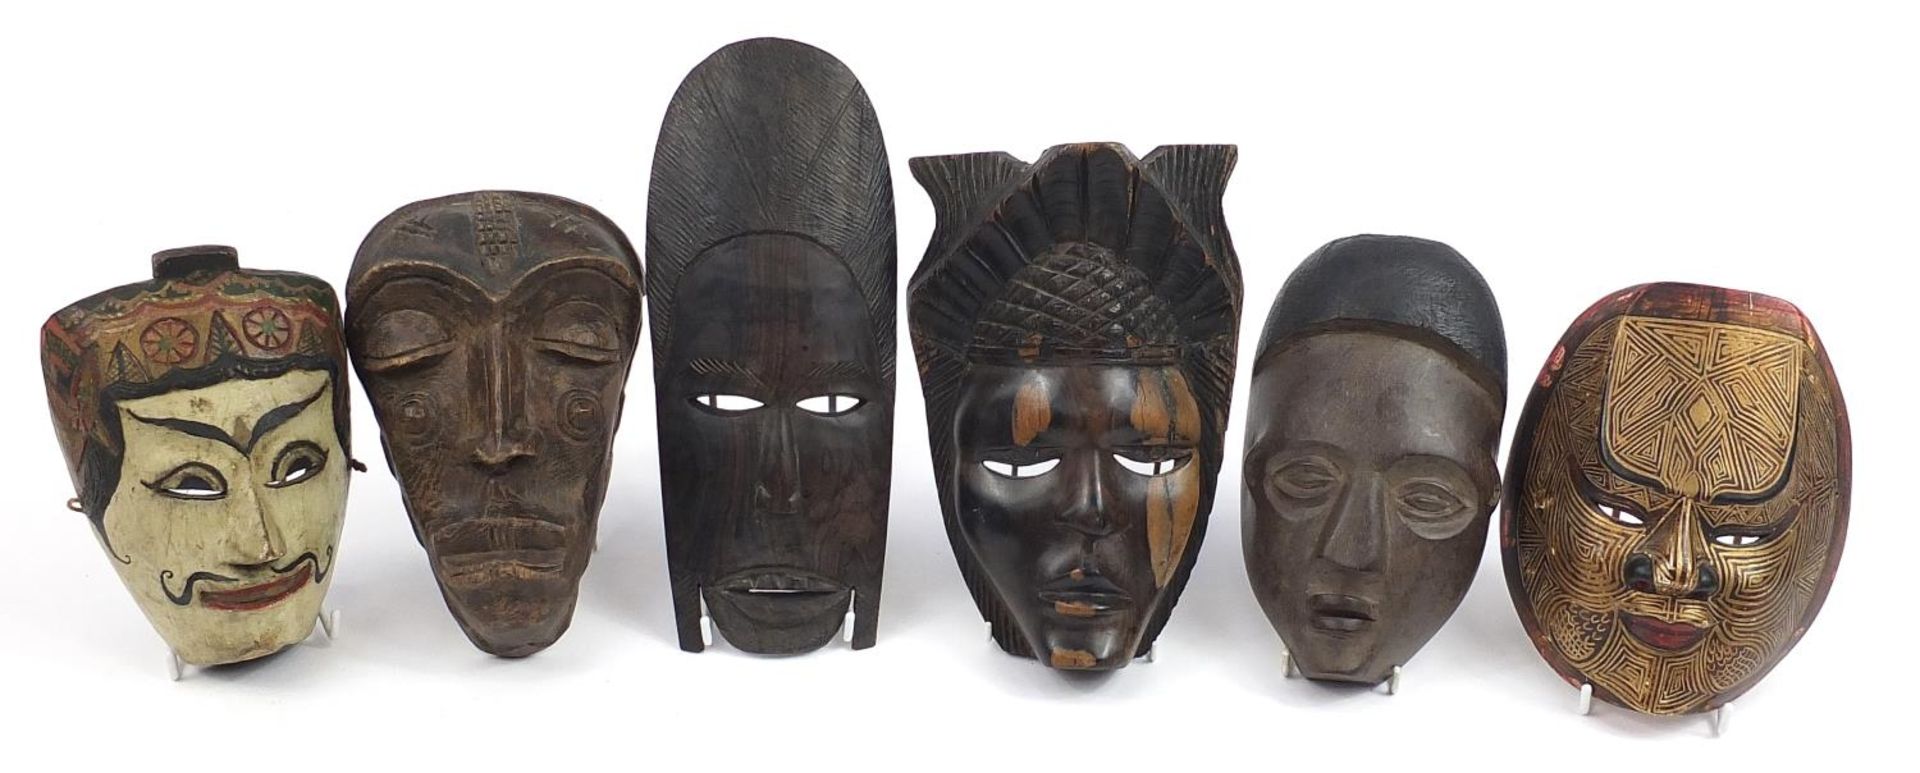 Six tribal interest carved wood face masks, the largest 31cm high